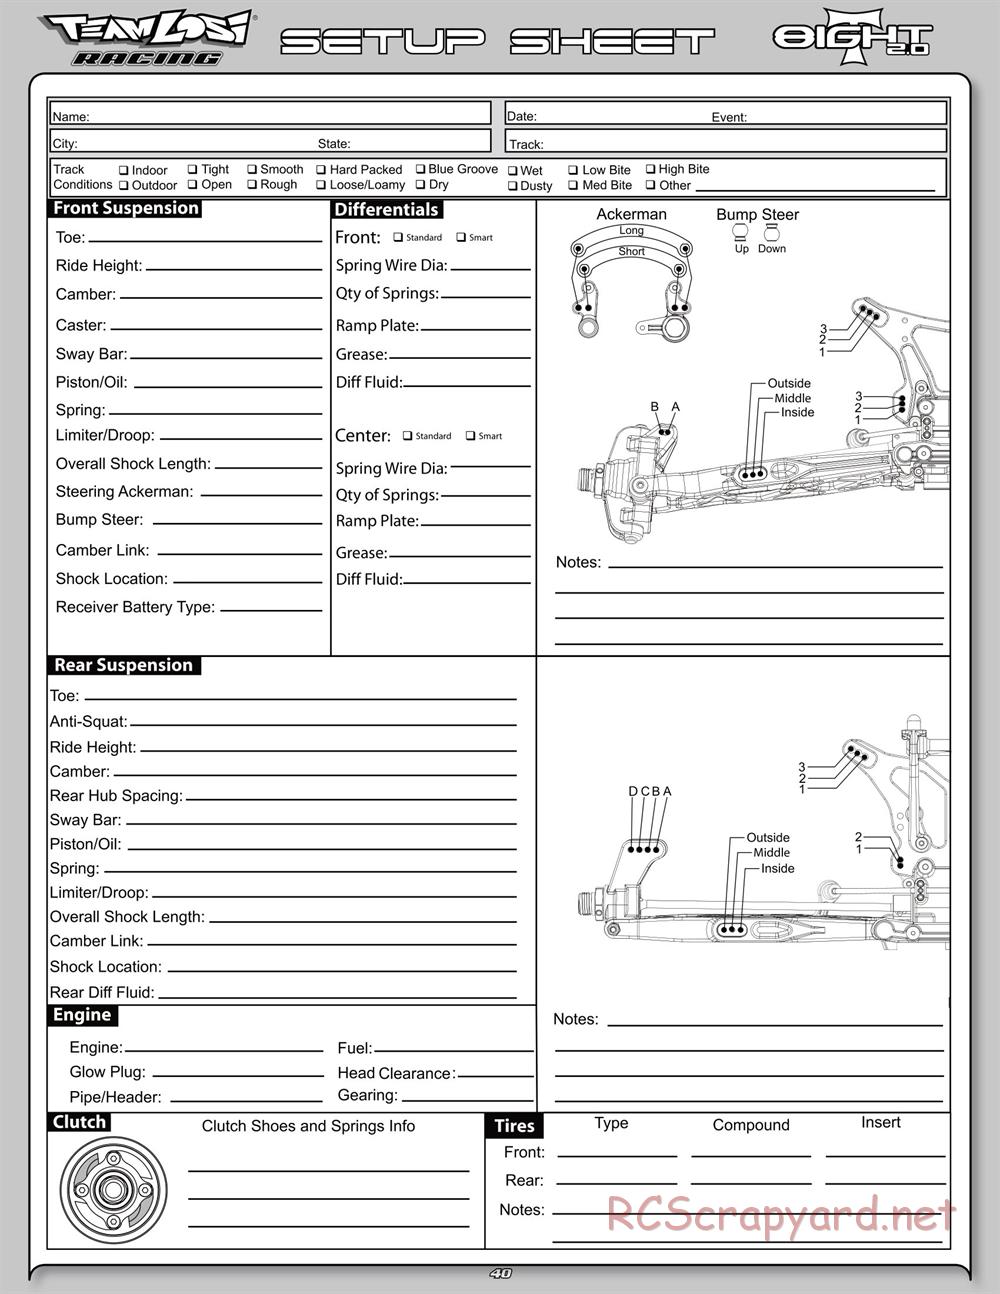 Team Losi - 8ight-T 2.0 Race Roller - Manual - Page 3